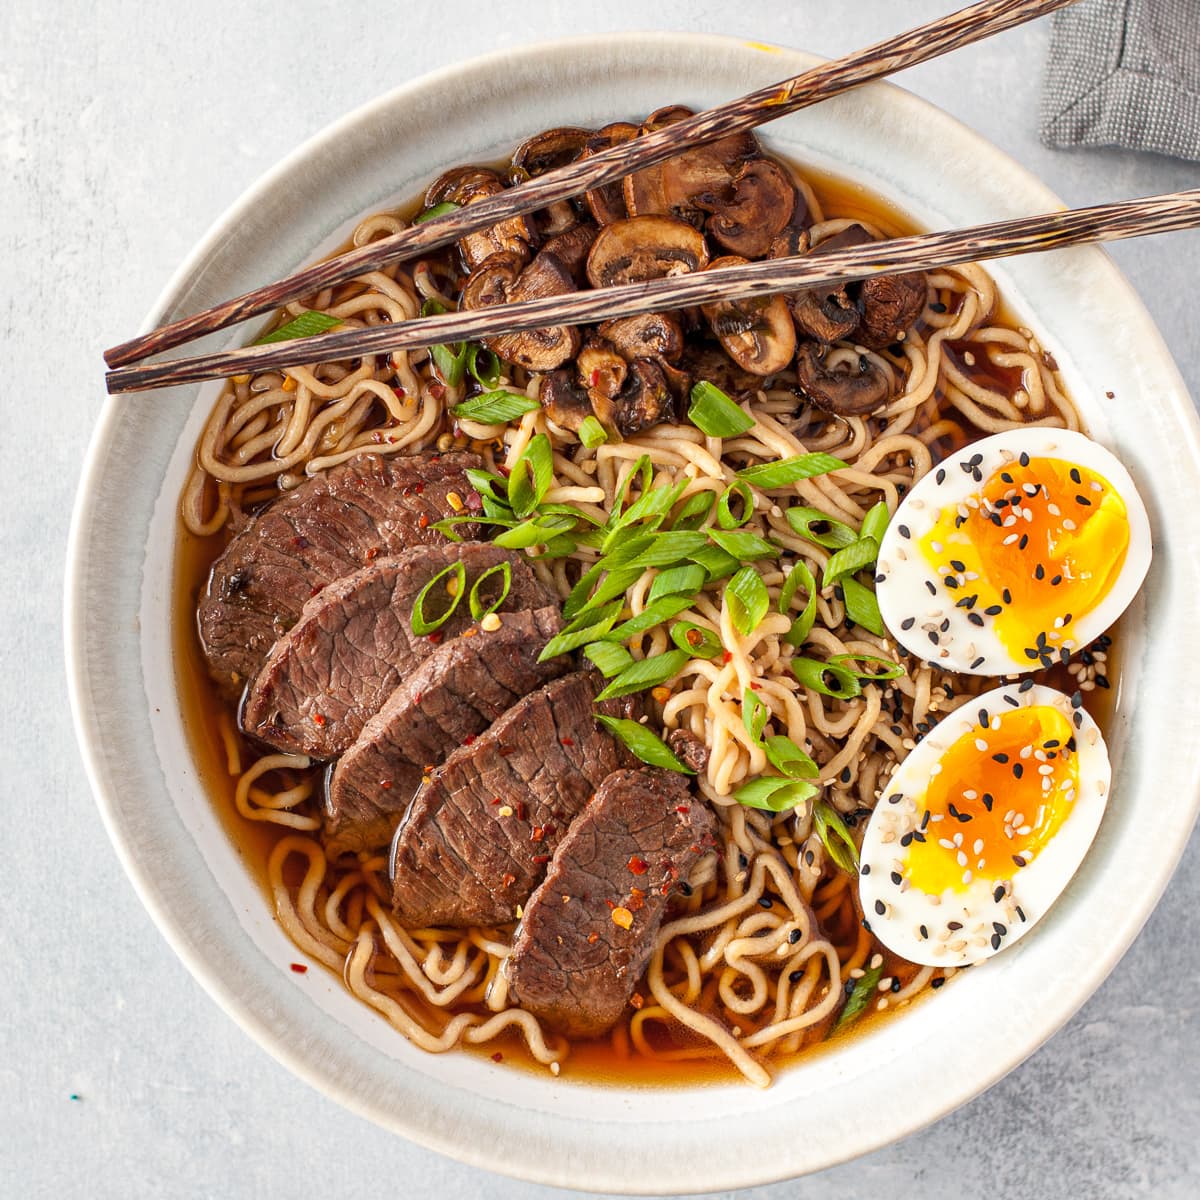 https://peaceloveandlowcarb.com/wp-content/uploads/2020/11/Beef-Ramen-Low-Carb-Peace-Love-and-Low-Carb-.jpg